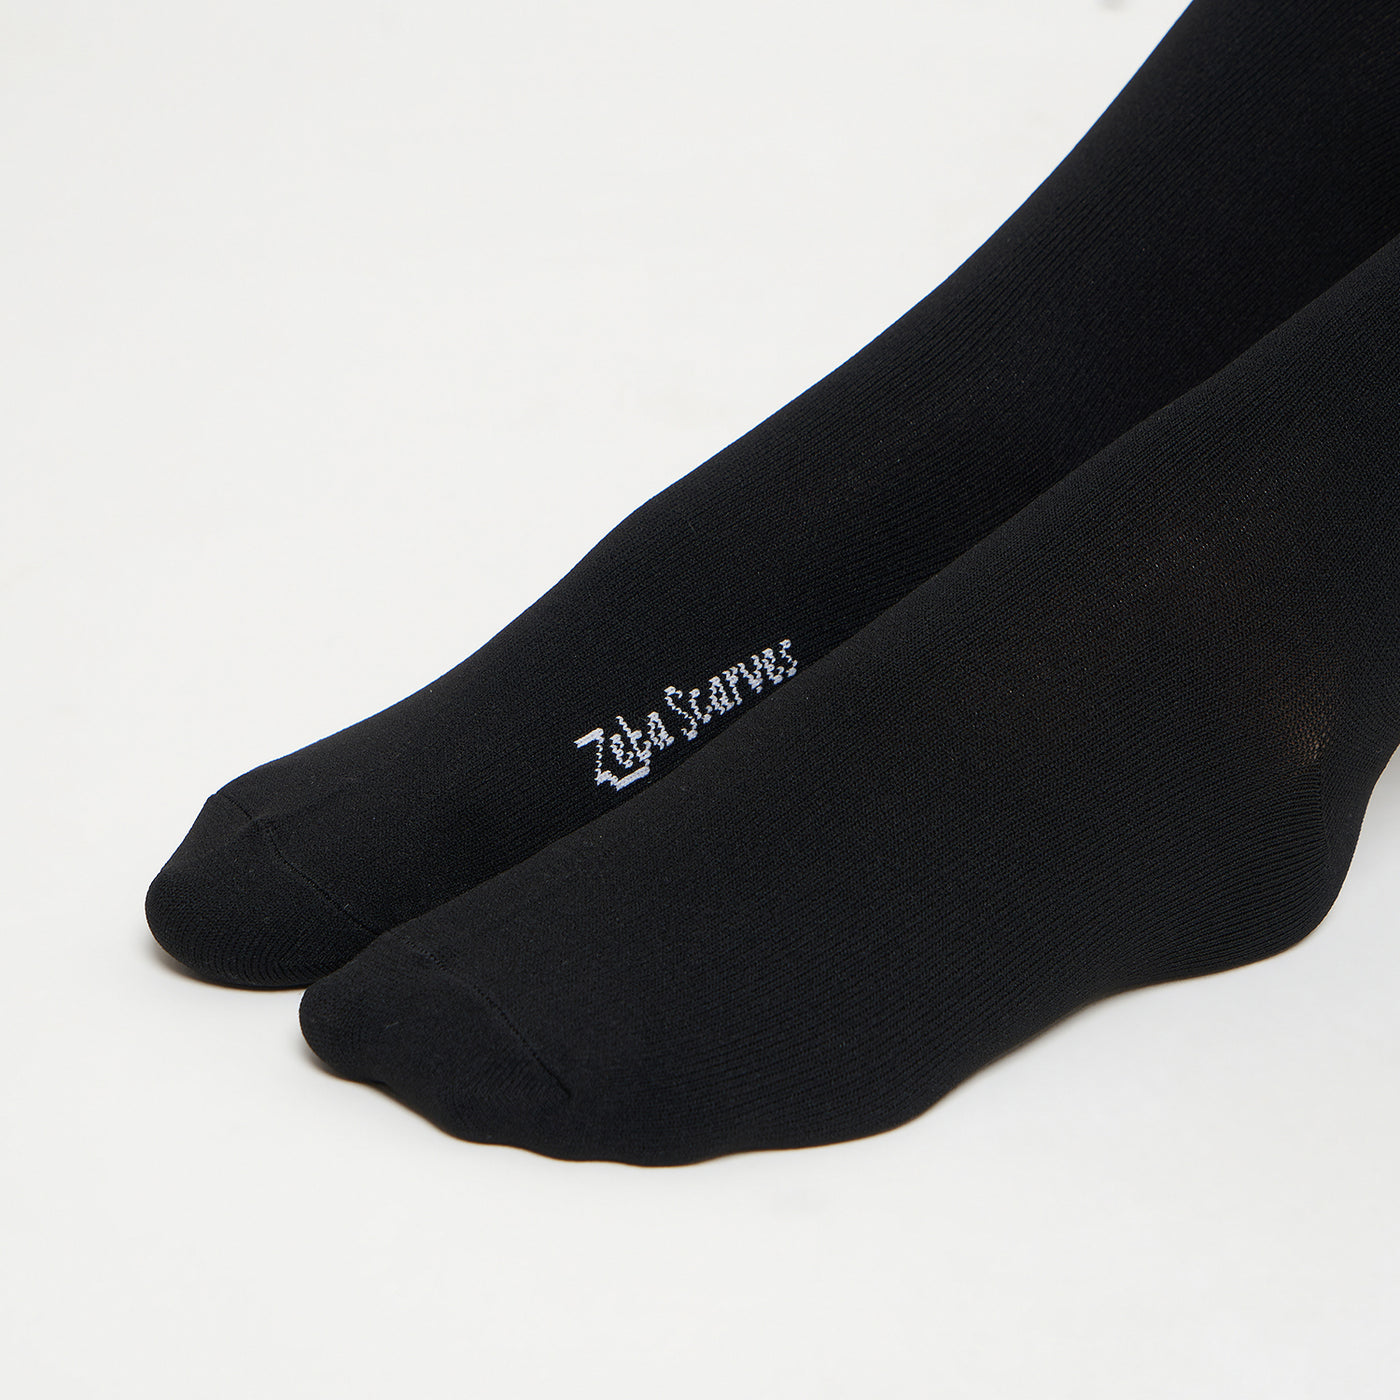 ZS Essential - Socks in 3 Colors